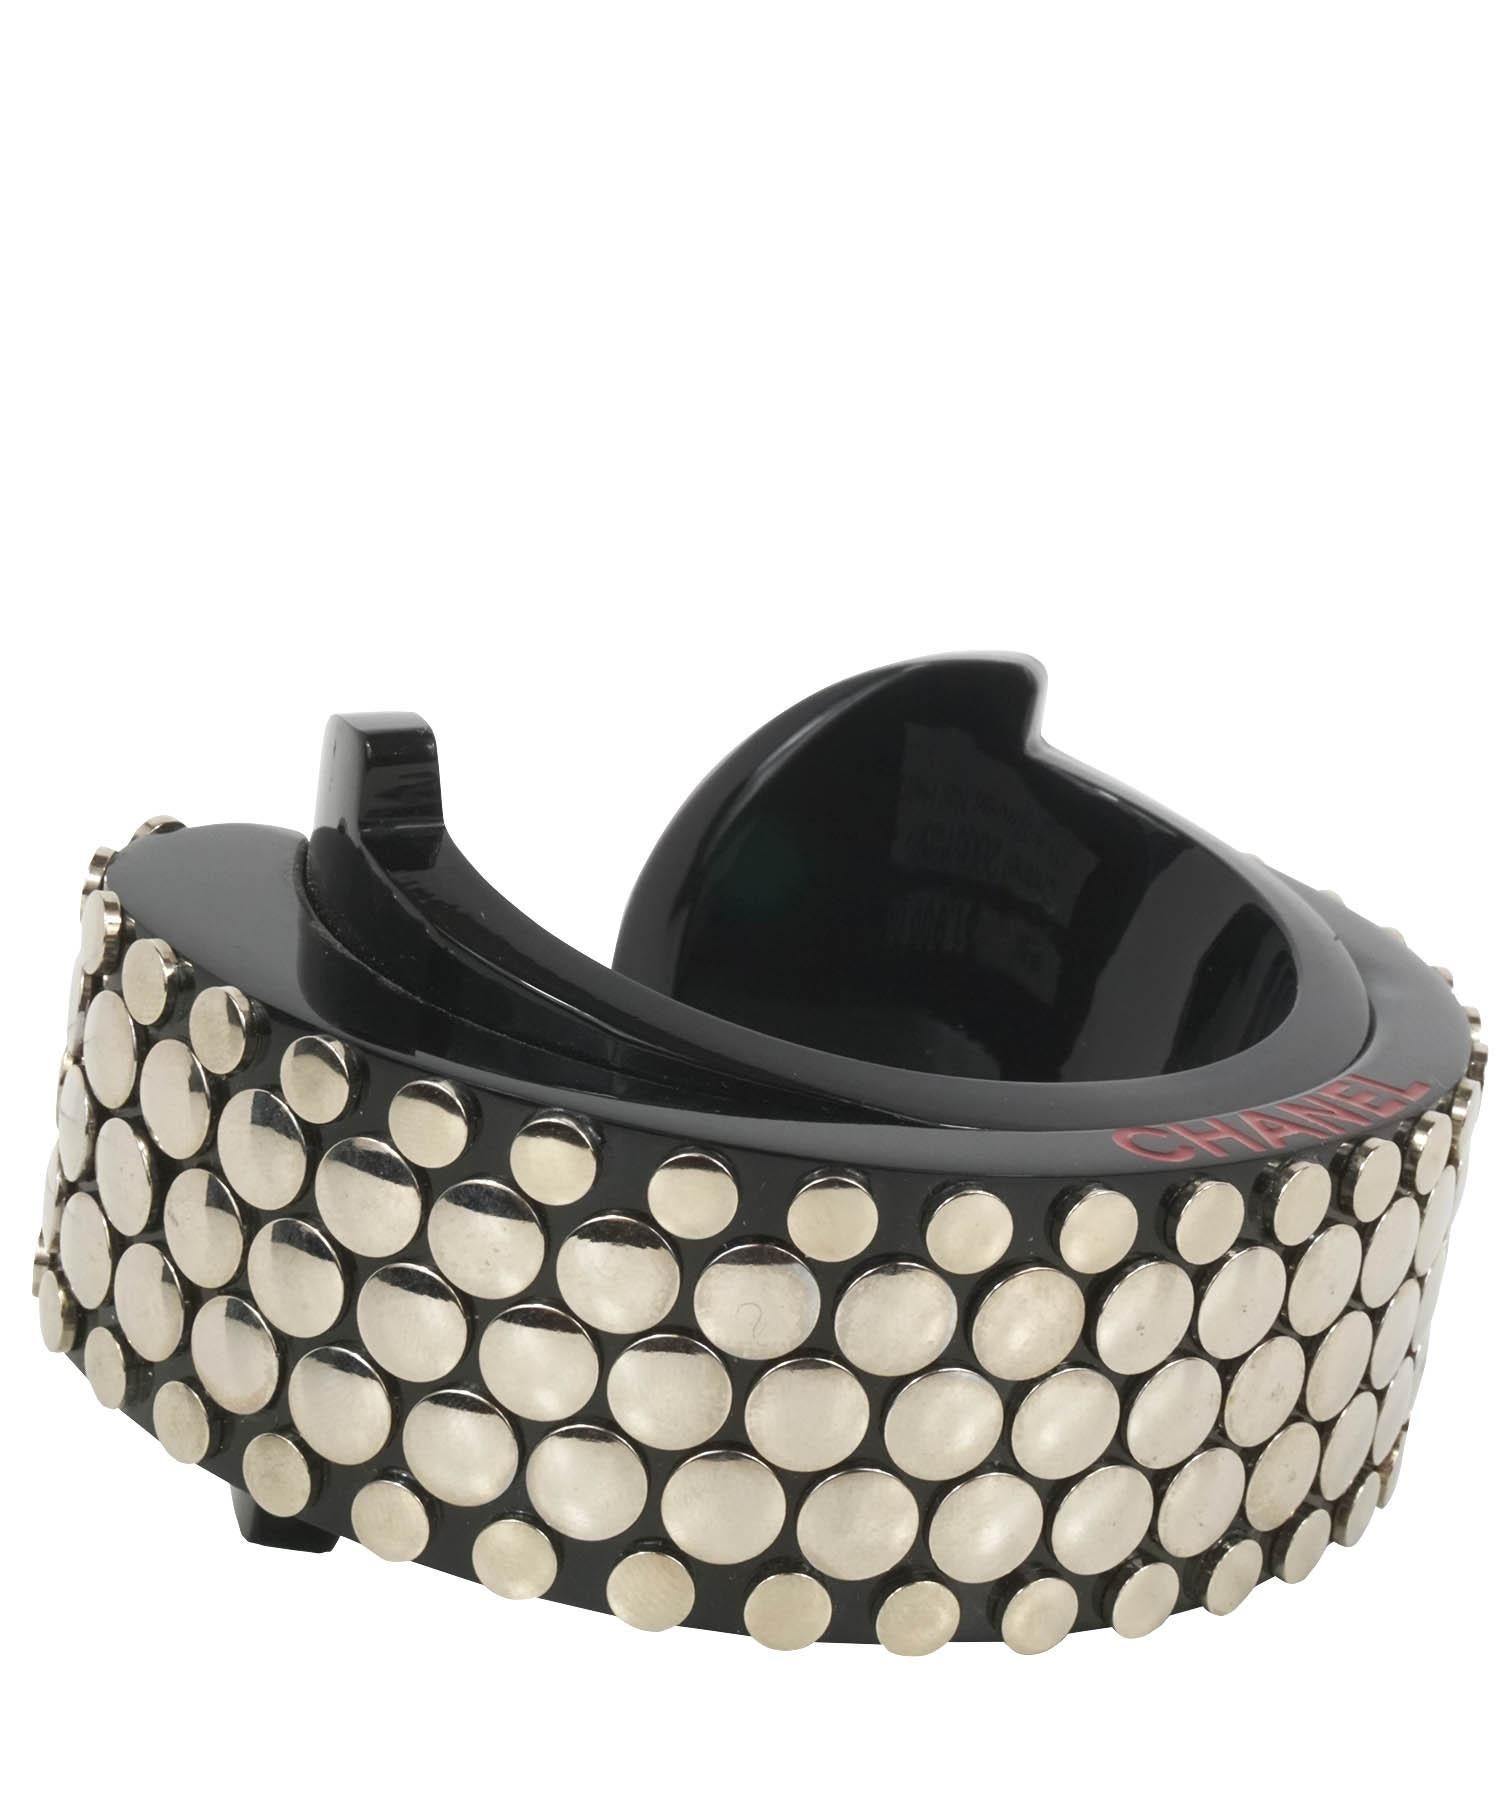 Chanel vintage Perspex cuff bracelet, from their 2005 Collection, is featured in black resin with silver-tone nail heads throughout. Cuff has CHANEL etched into side perimeter. Cuff is wide and thick. Made in Italy. Cuff is in excellent condition